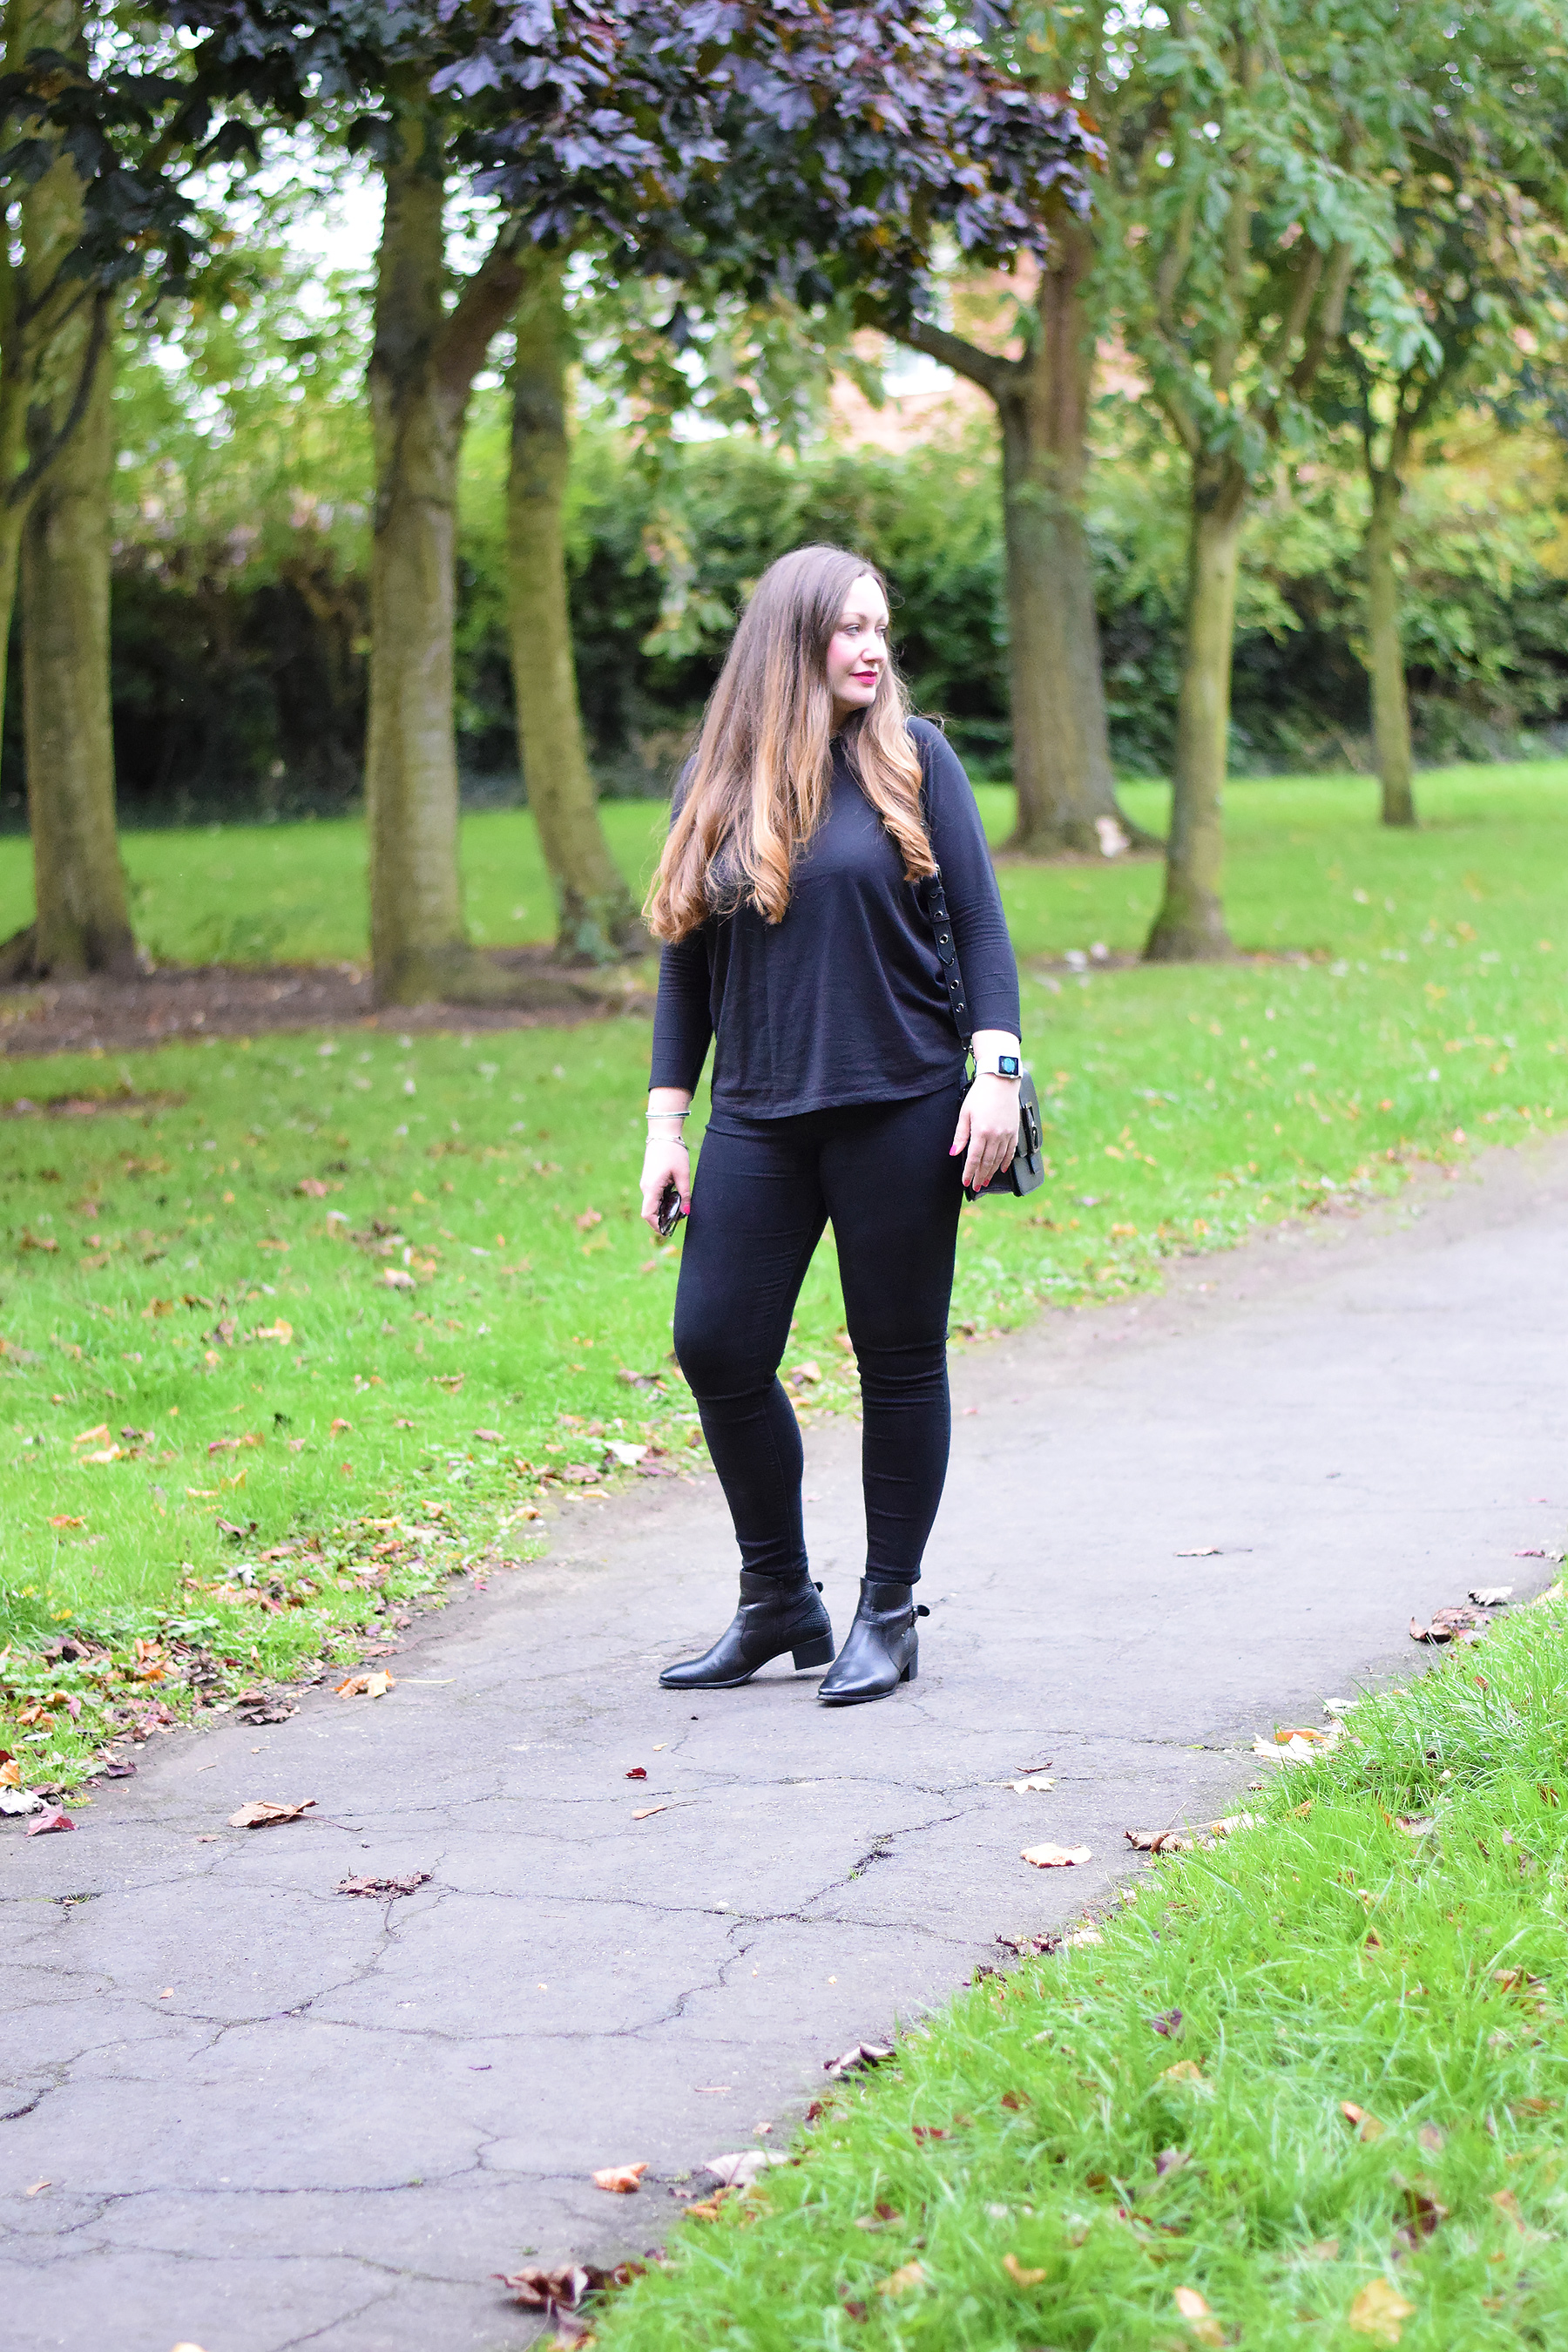 Flat Black ankle boots with skinny jeans and a black tee